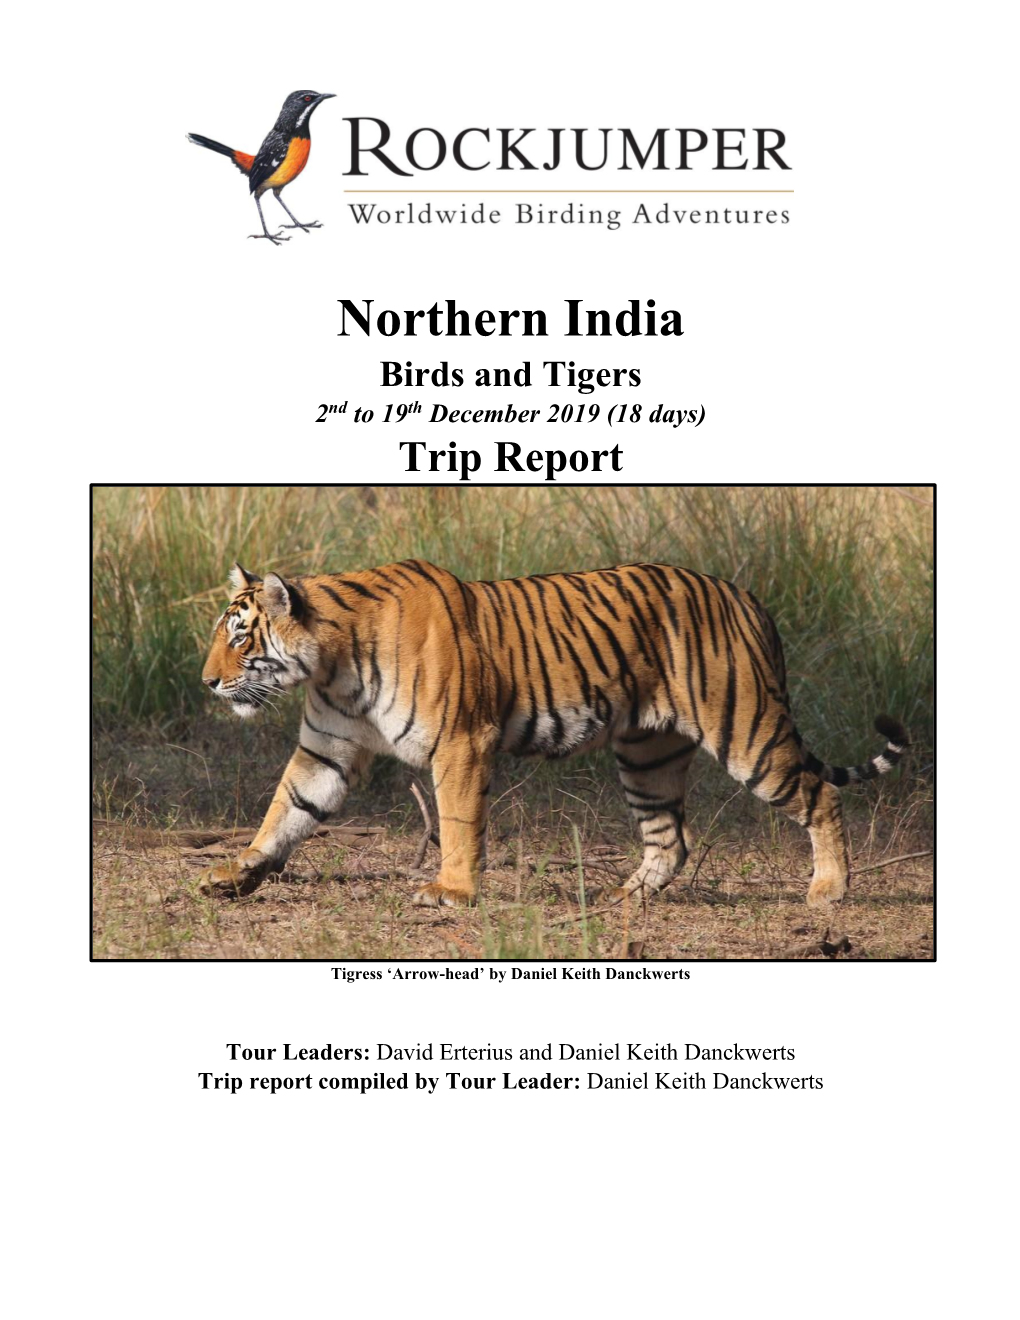 Northern India Birds and Tigers 2Nd to 19Th December 2019 (18 Days) Trip Report